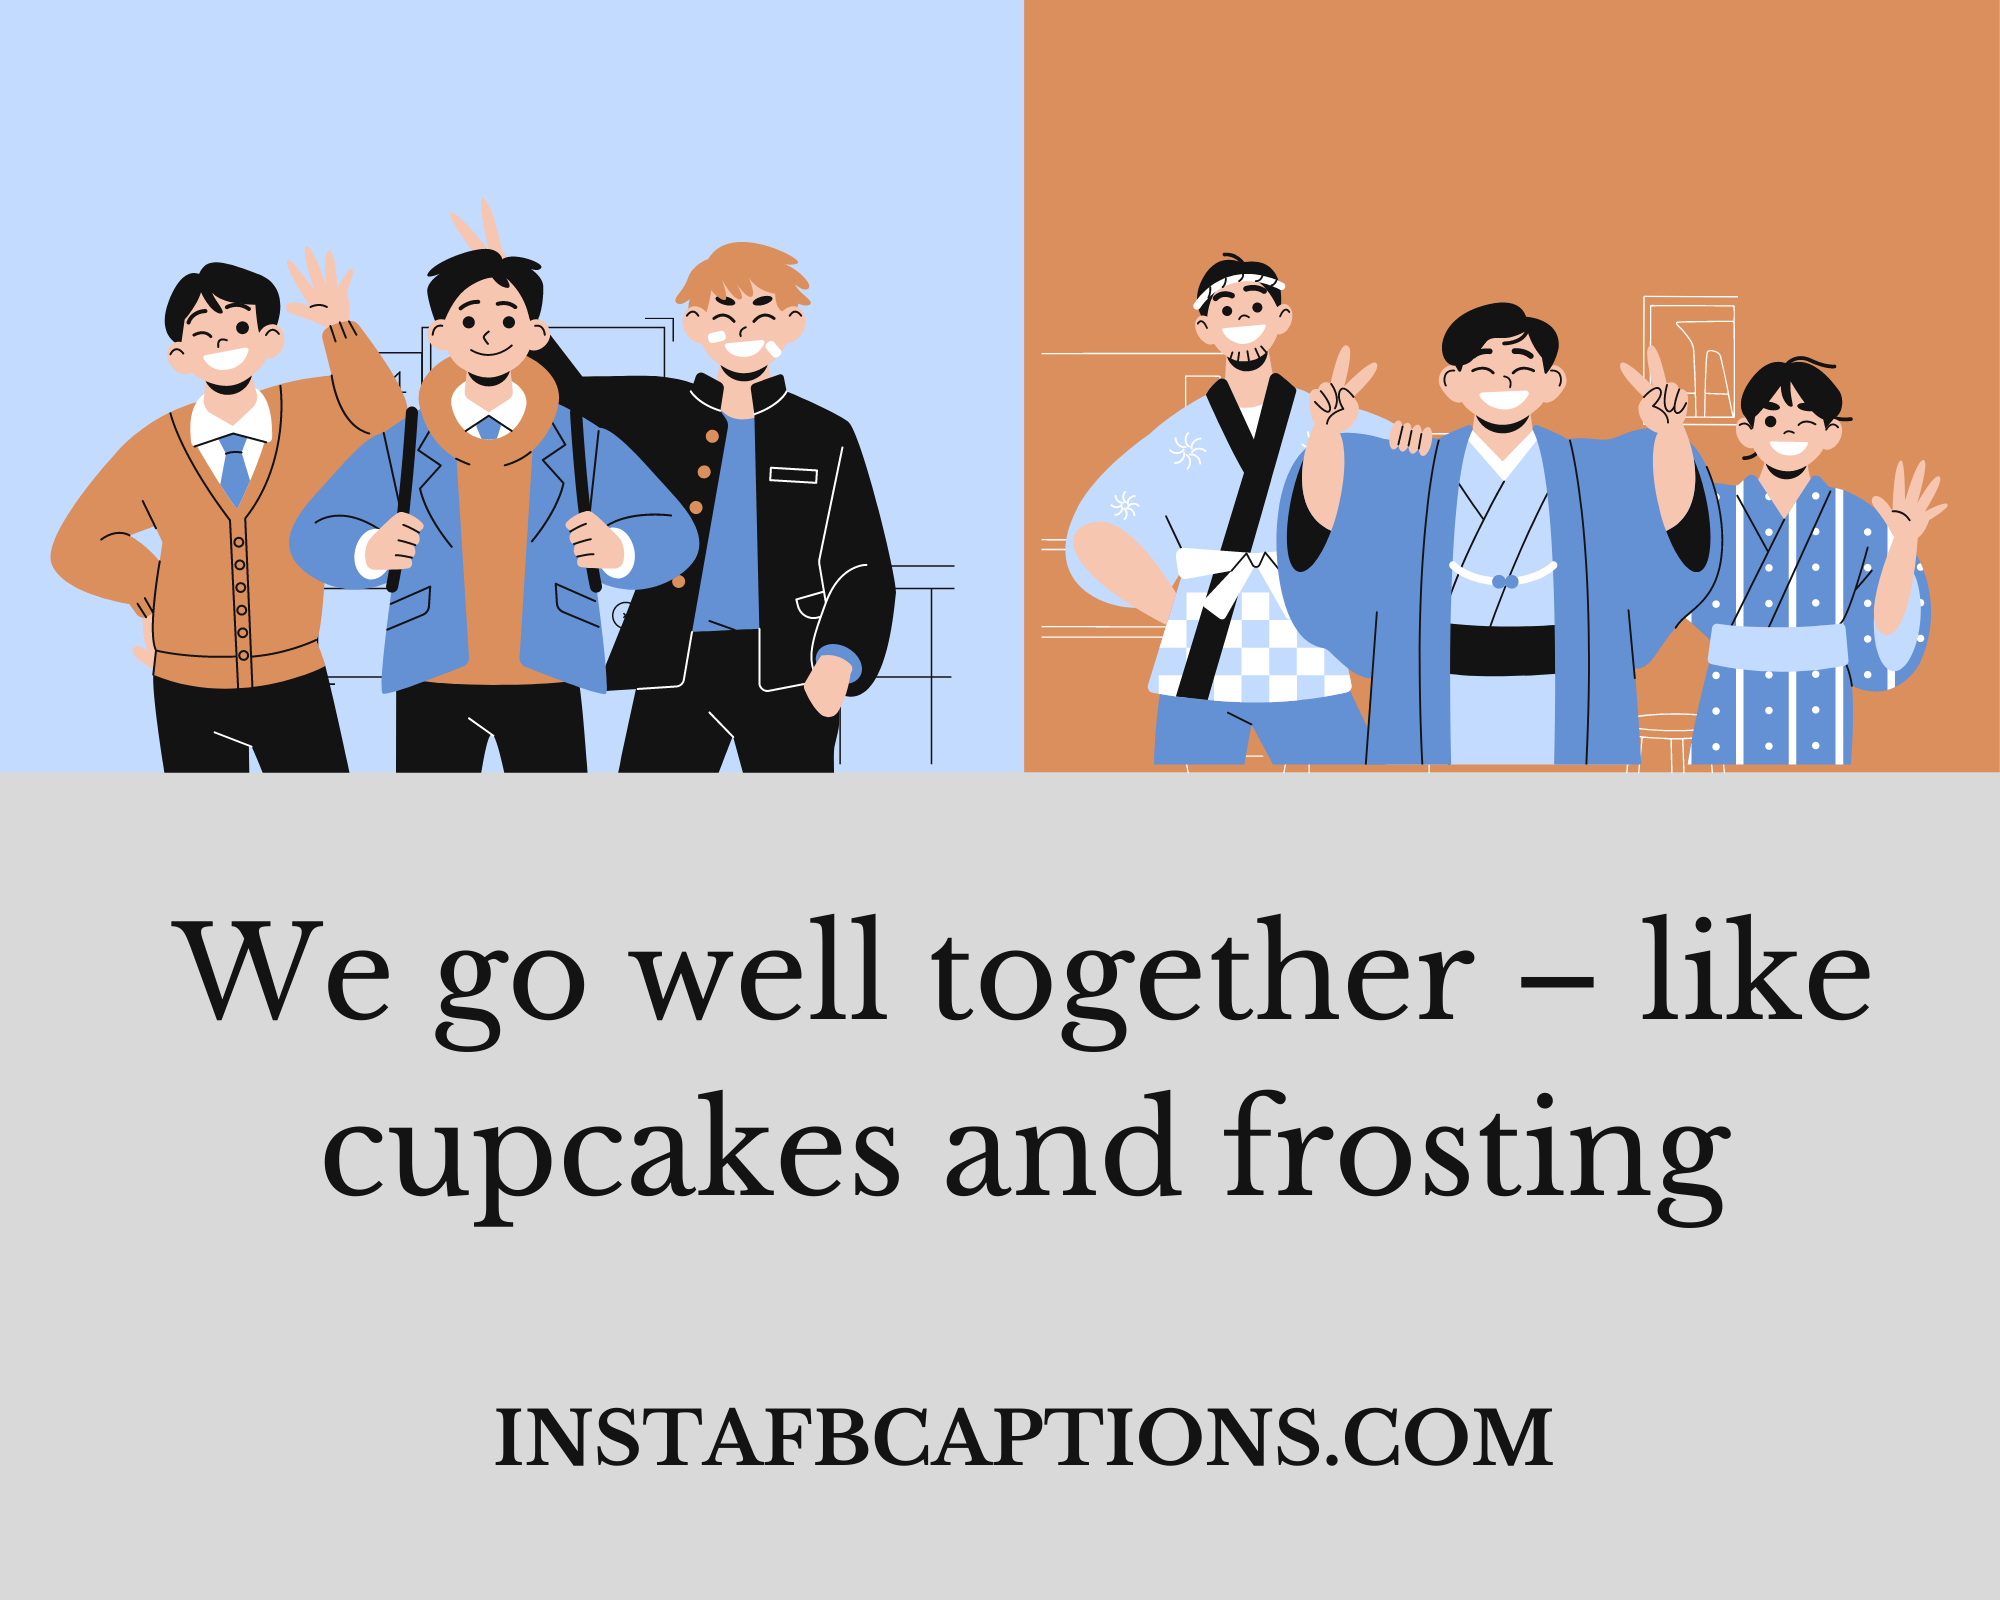 Instagram Captions For Boys Squad  - Instagram Captions for Boys Squad - Instagram Captions for Squad Pictures in 2022